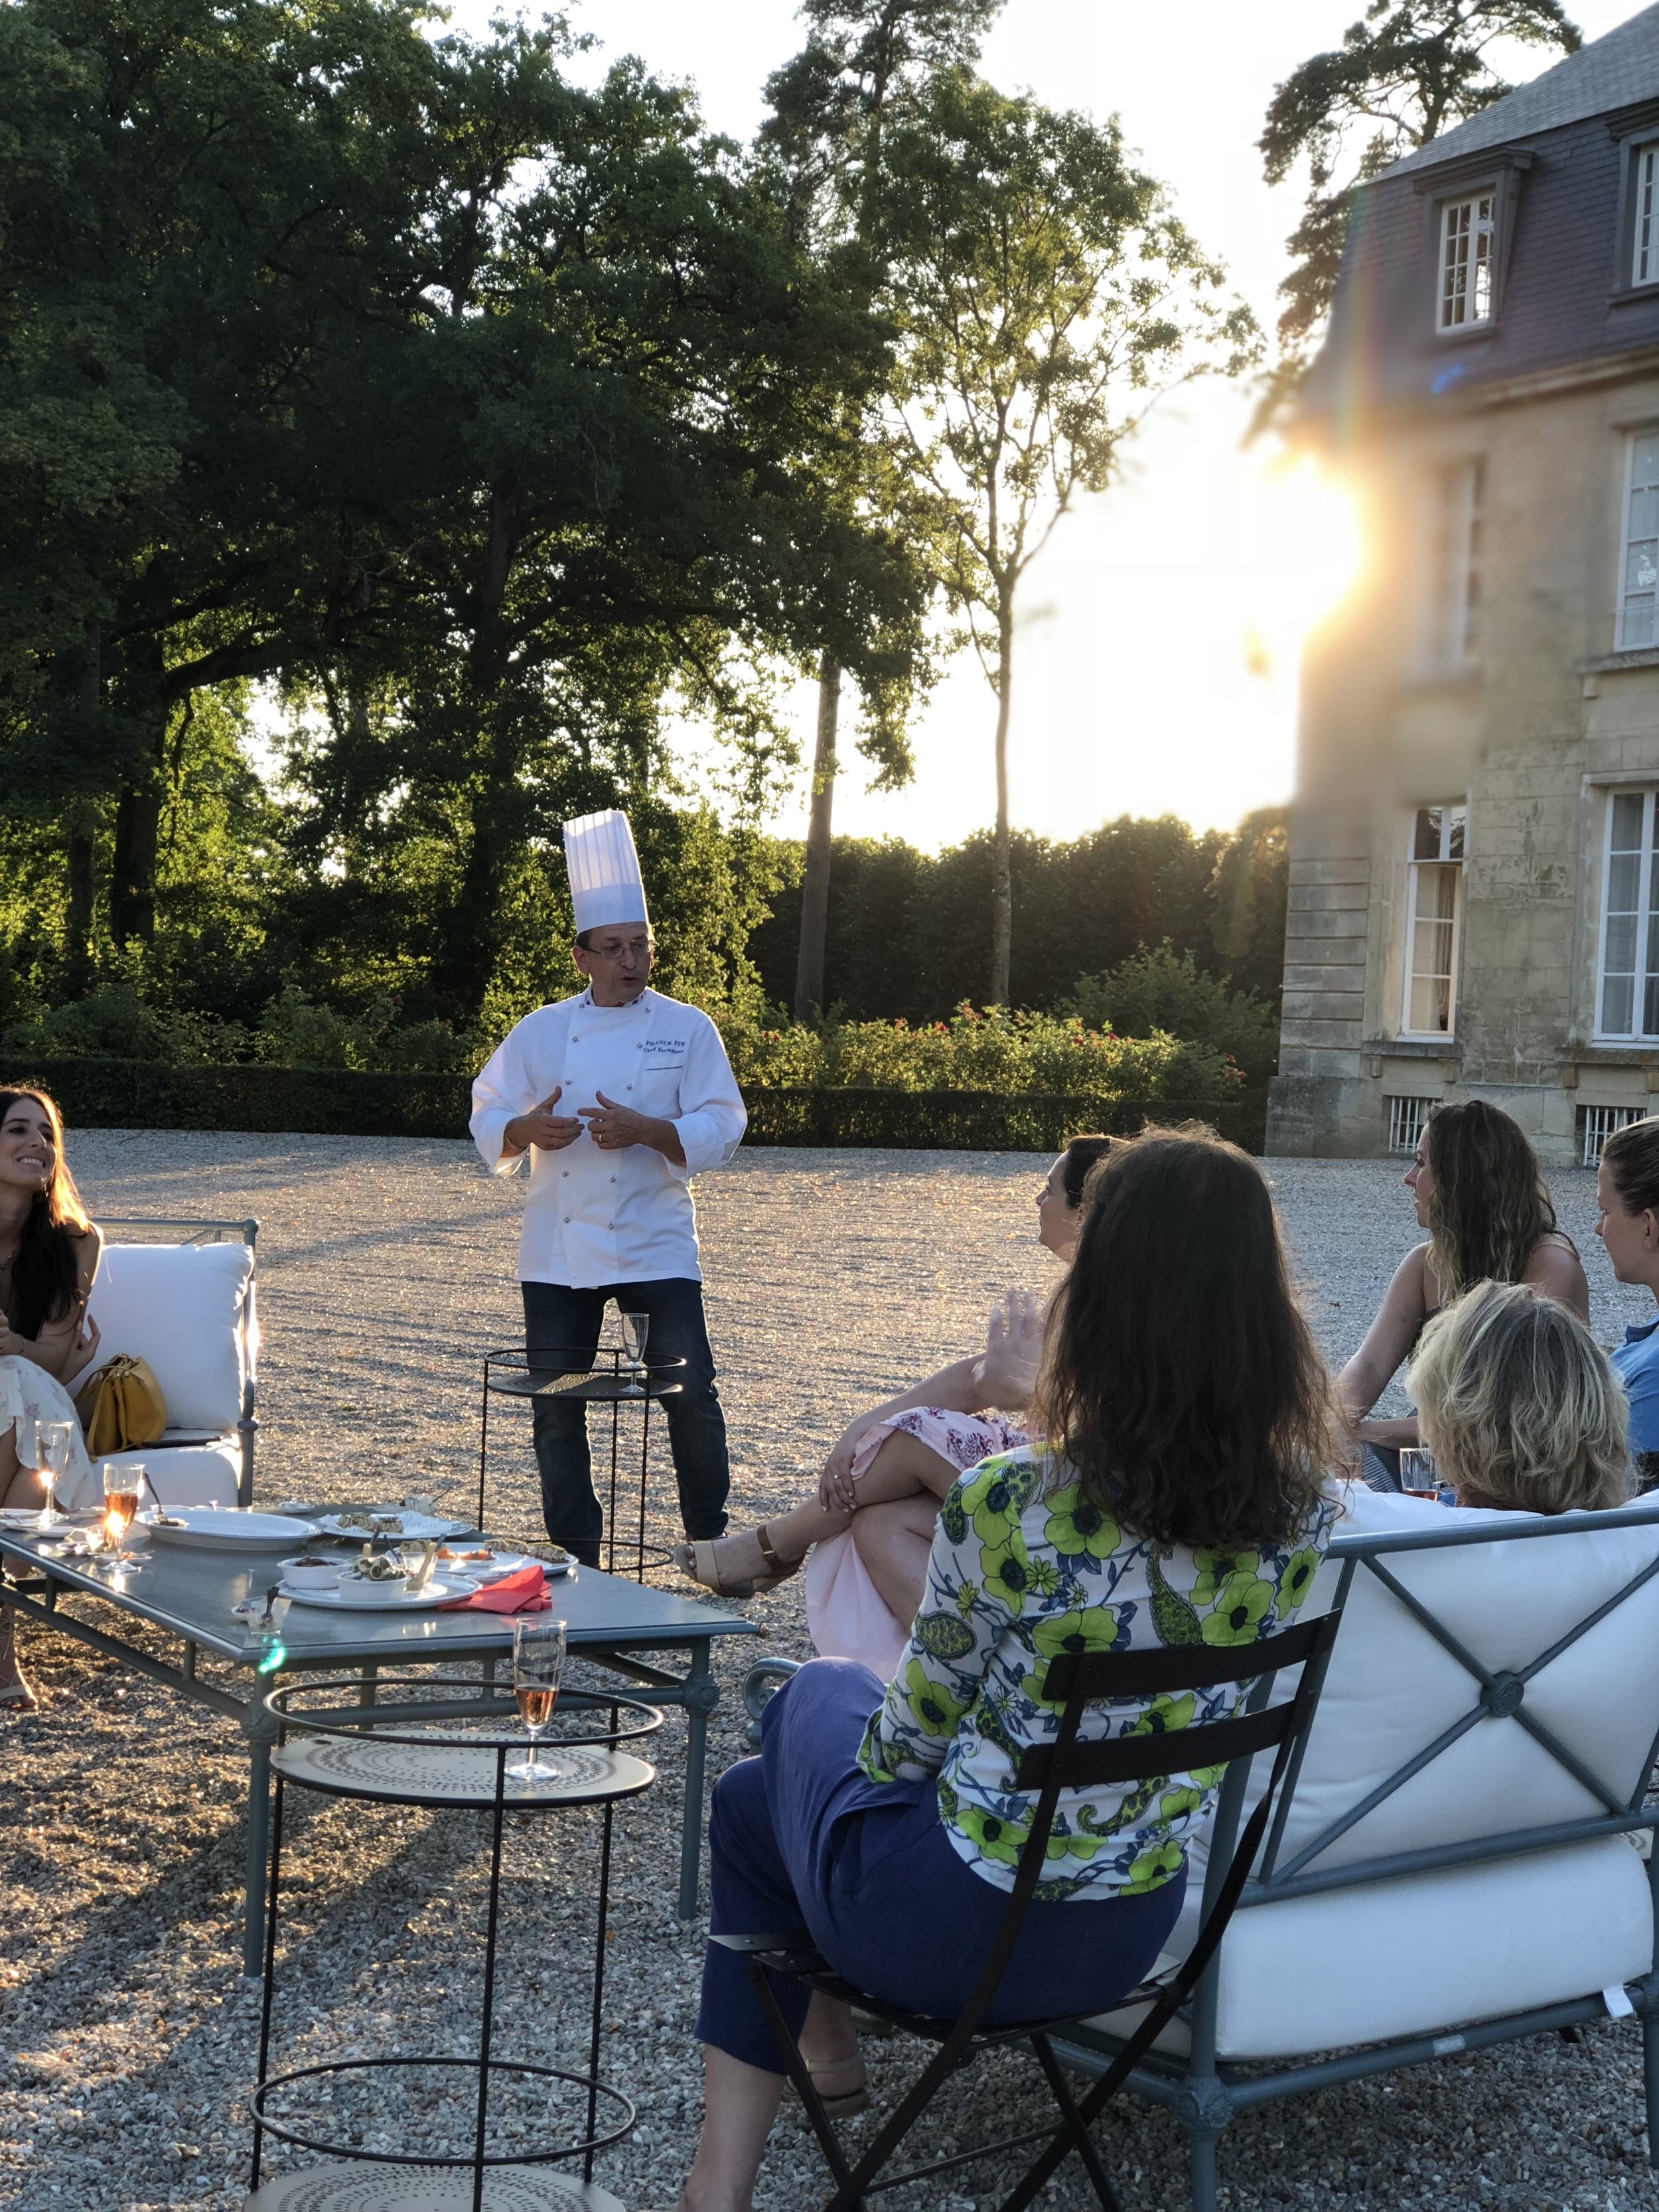 People relaxing with a drink and food on comfortable chairs outside the chateau at sunset, listening to a chef talking.